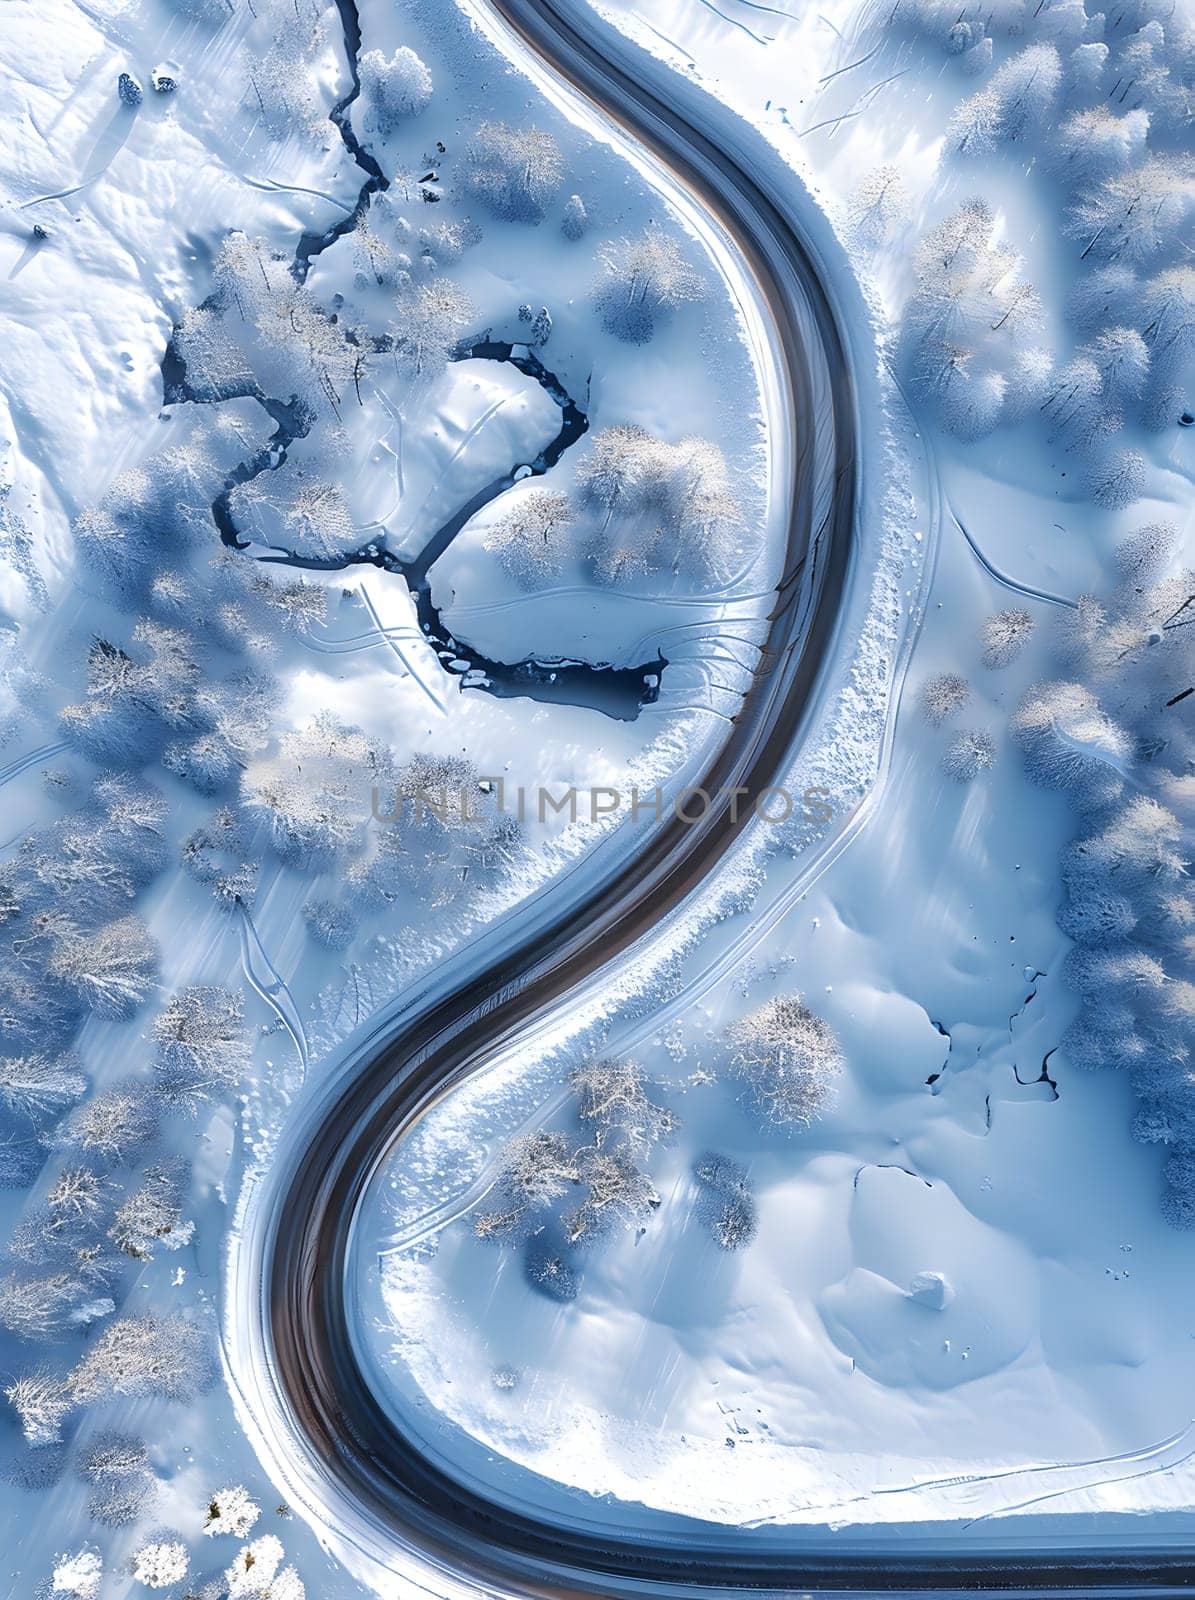 An electric blue pattern of winding road in snow seen from above resembles a circle rim on a vehicle door, creating a beautiful landscape view